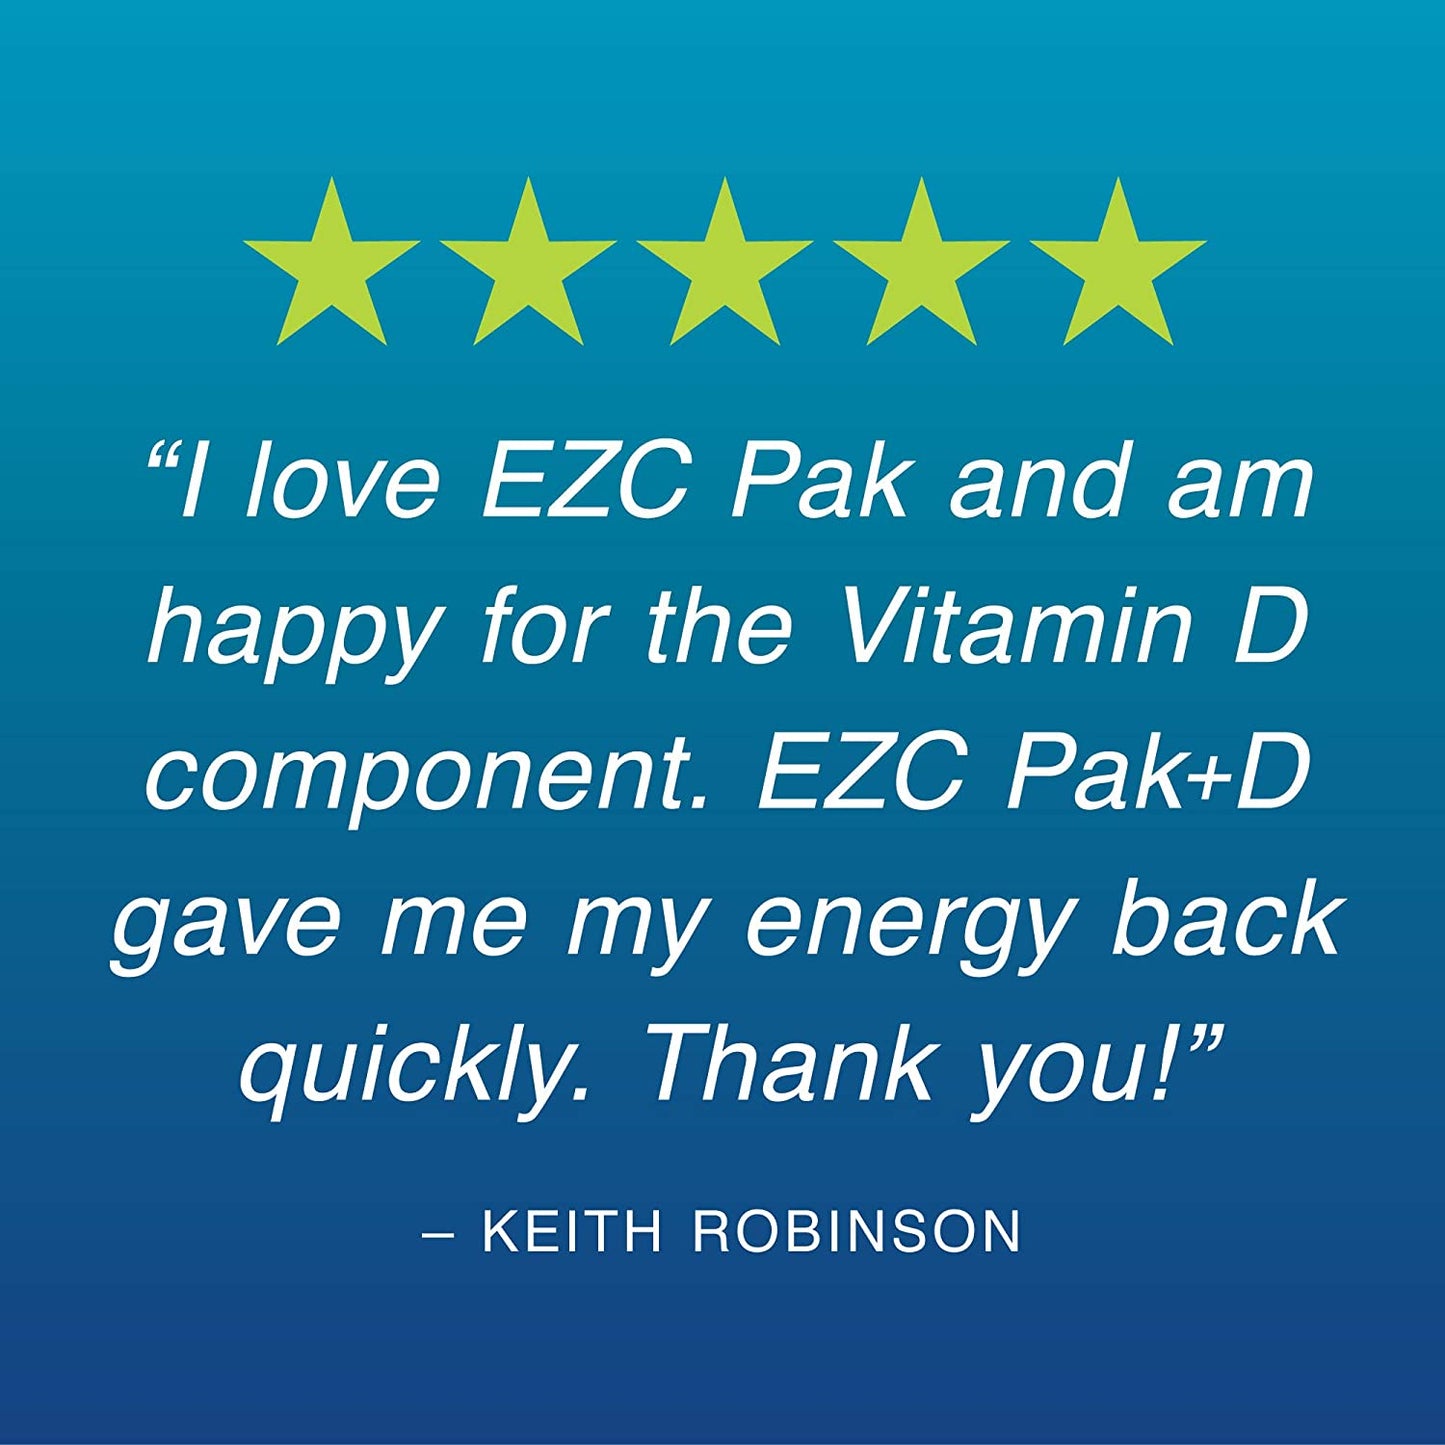 EZC Pak+D 5-Day Tapered Immune System Testimonial I love EZC Pak and am happy for the vitamin d component. EZC Pak+D gave me my energy back quickly. Thank you from Keith Robinson